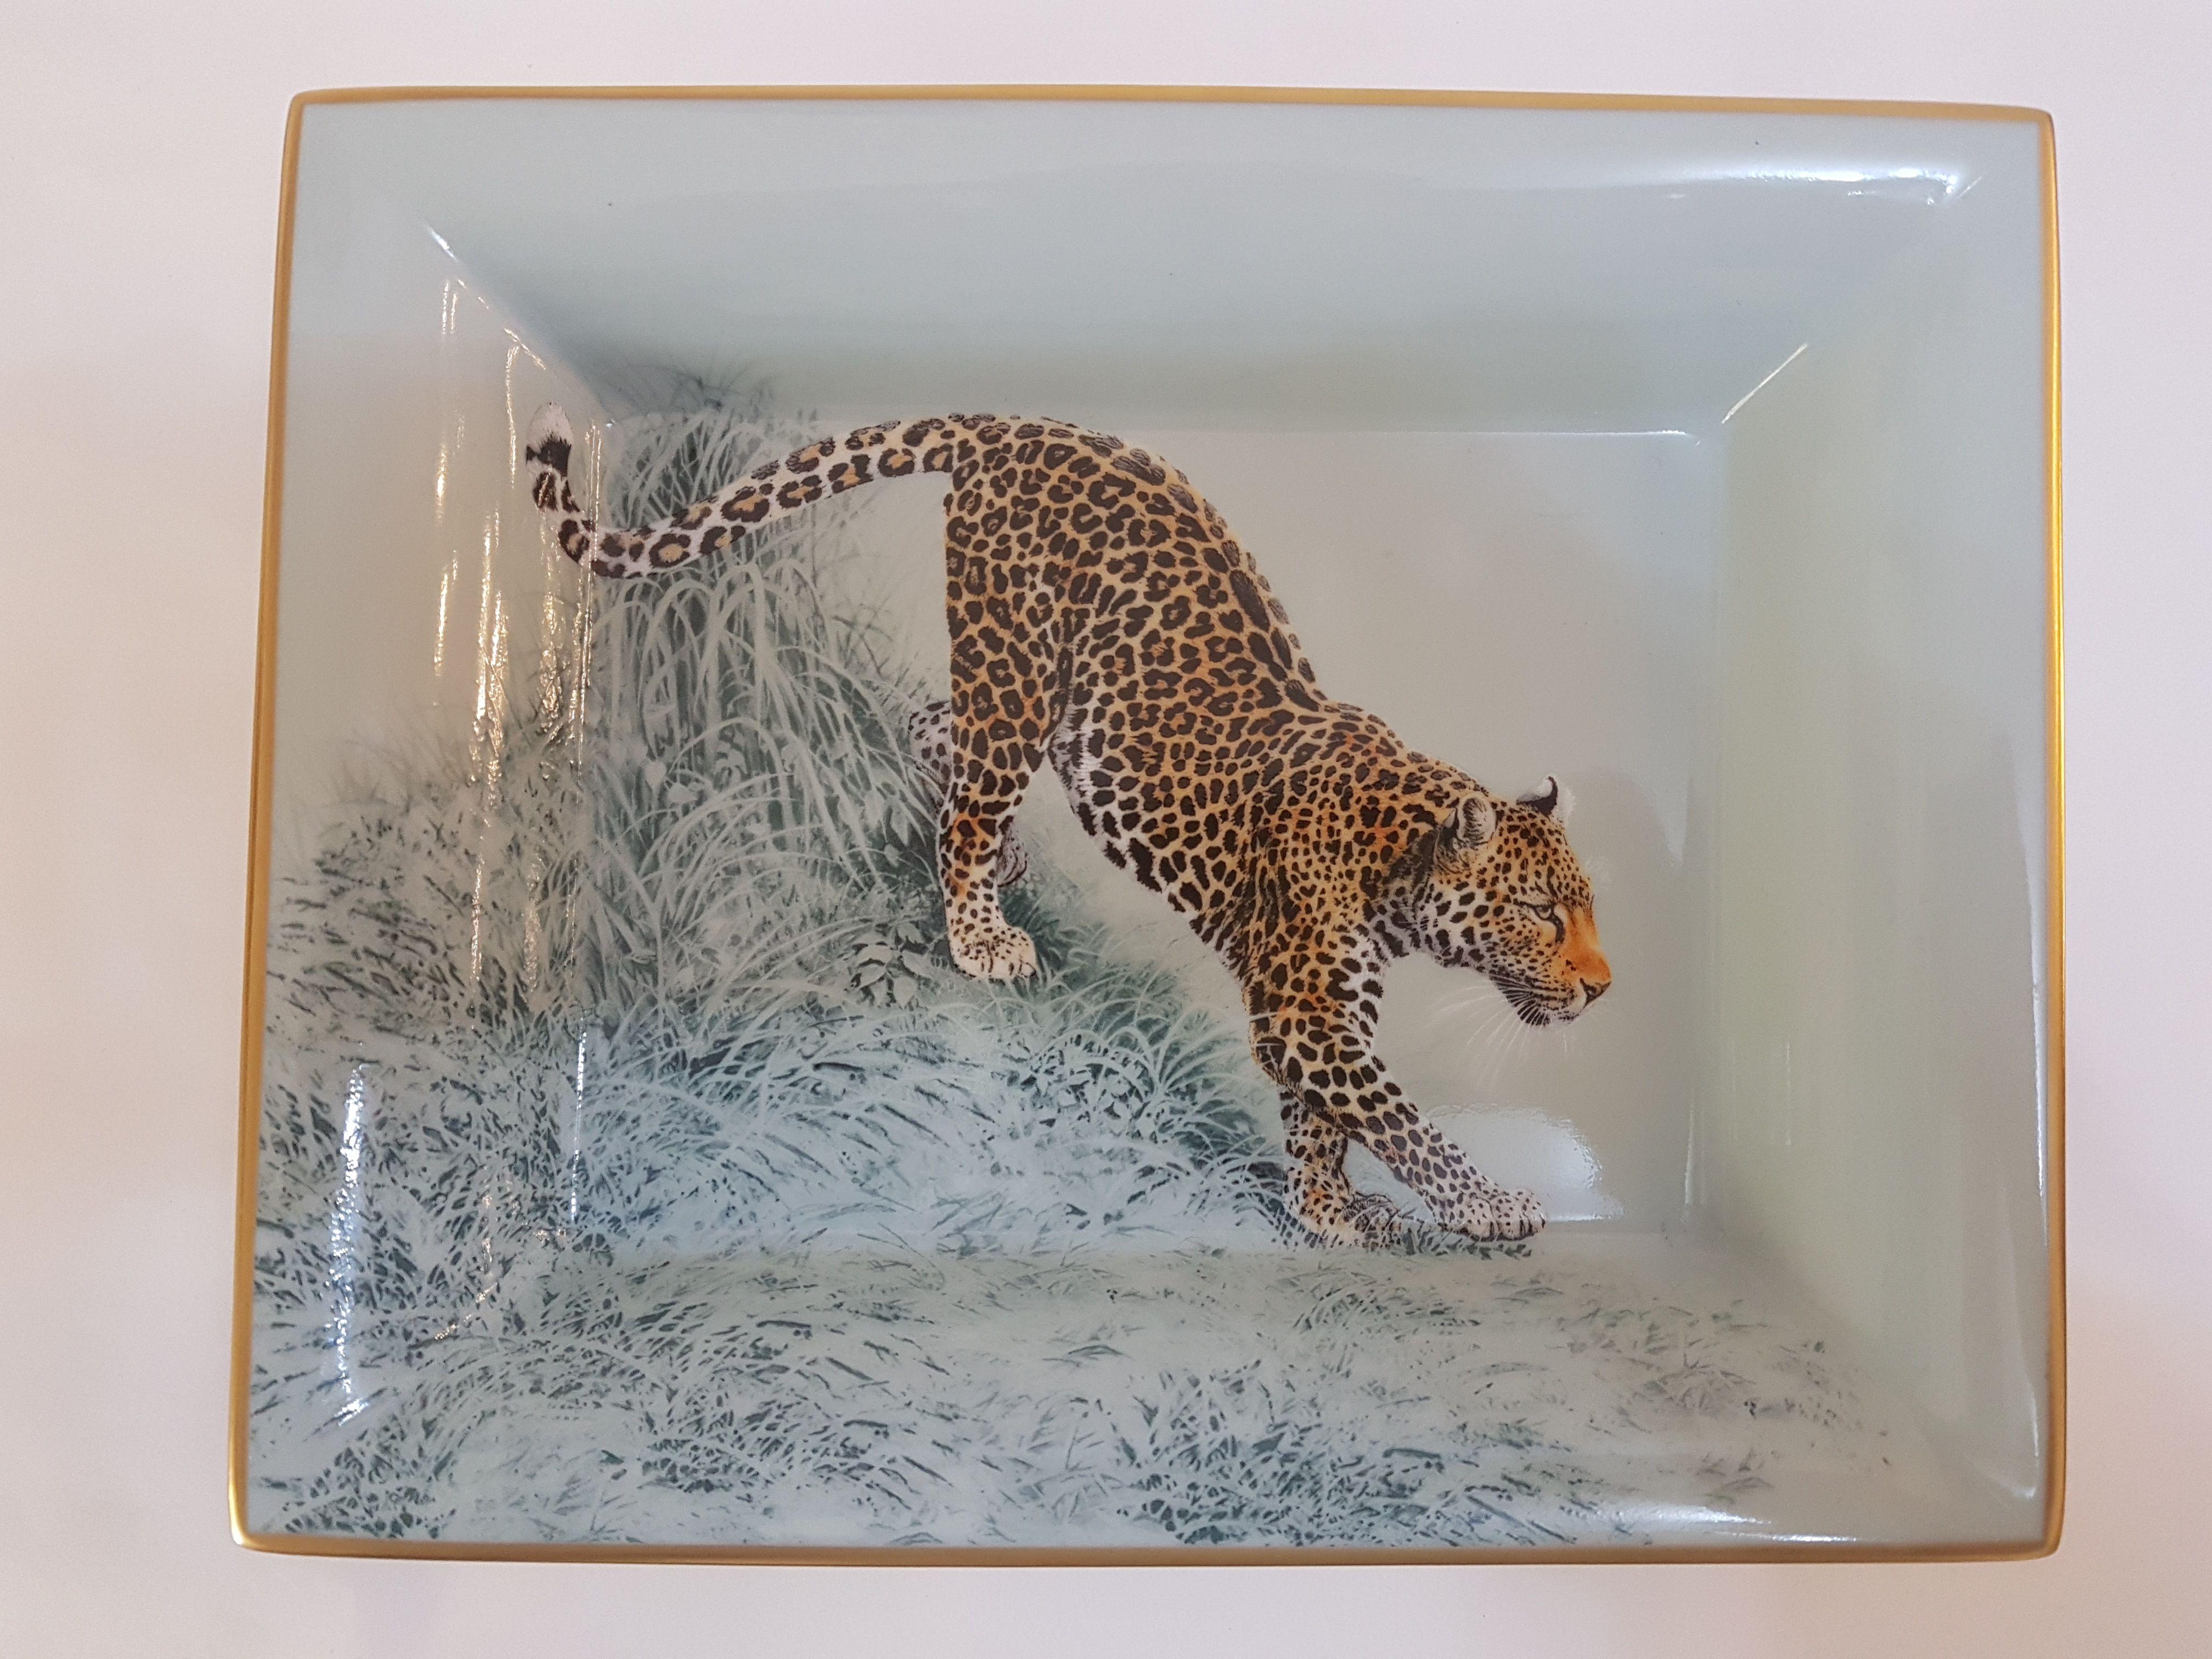 Hermès carnets d' Equateur: jaguars, macaws, panthers and impalas frolic through lush natural settings under the watchful eye of naturalist and painter Robert Dallet. This porcelain collection breathes new life into the full range of the artist’s